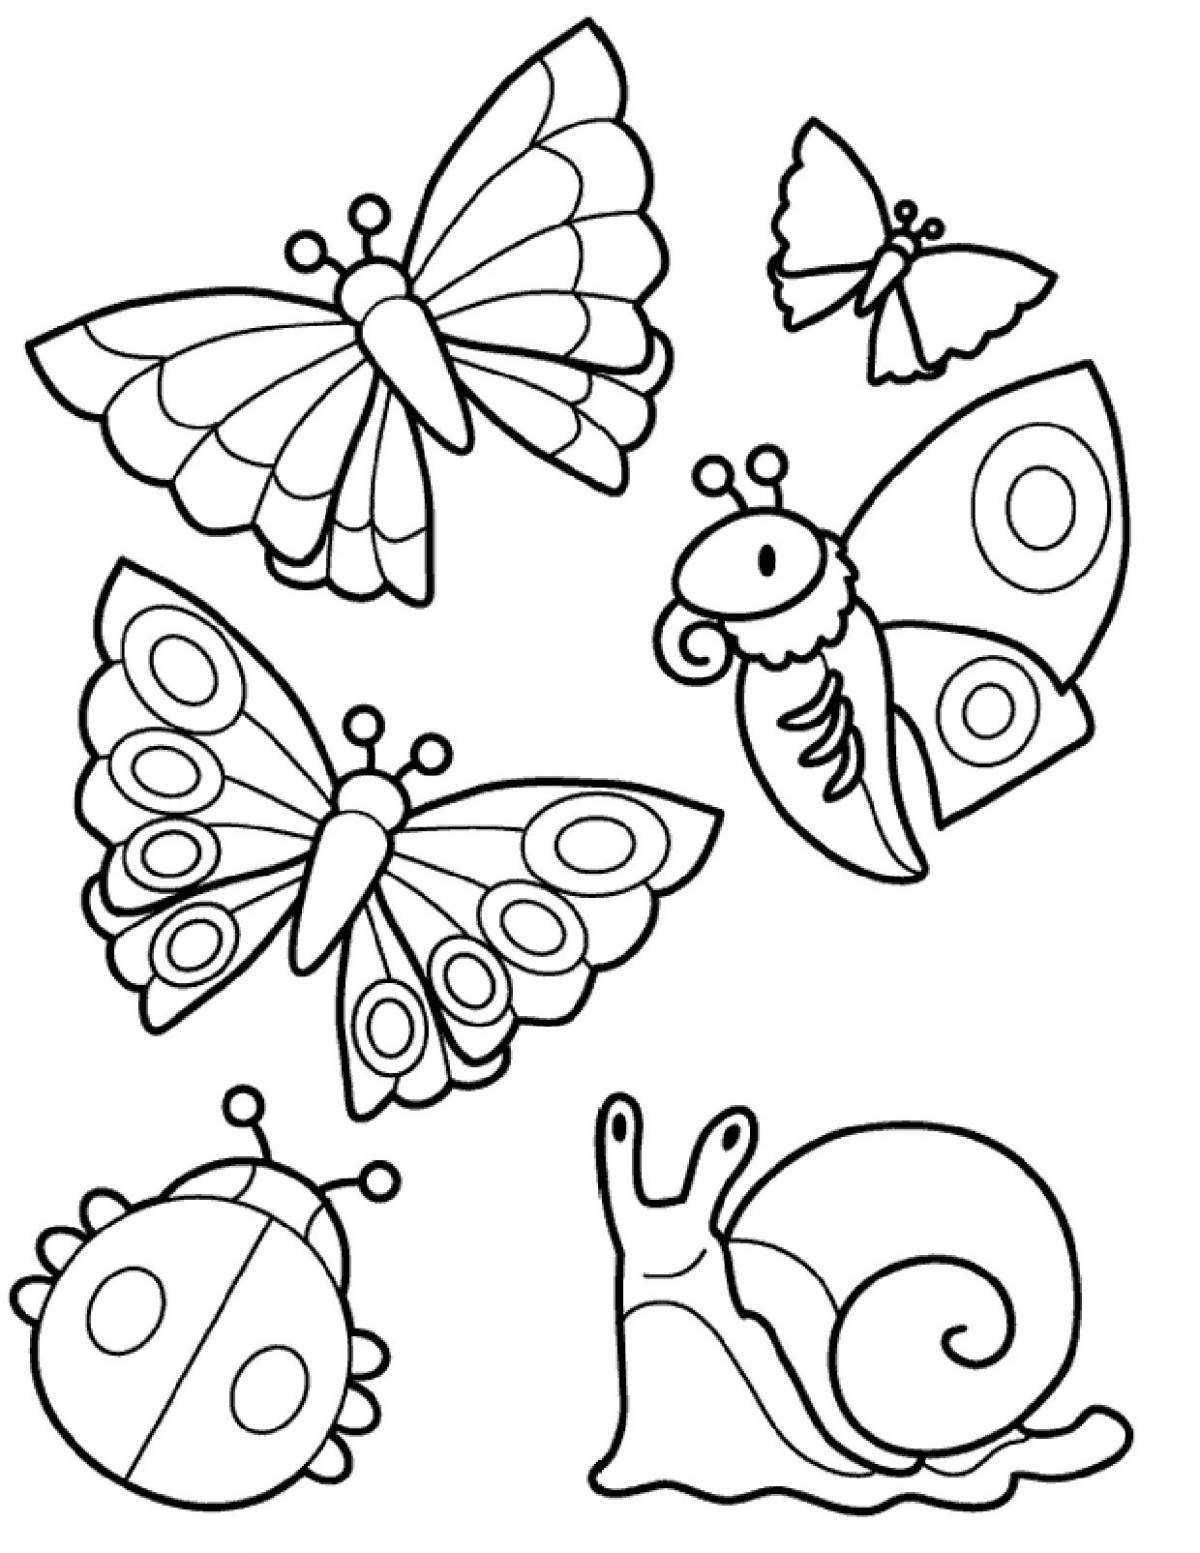 Insects for kids 6 7 #4